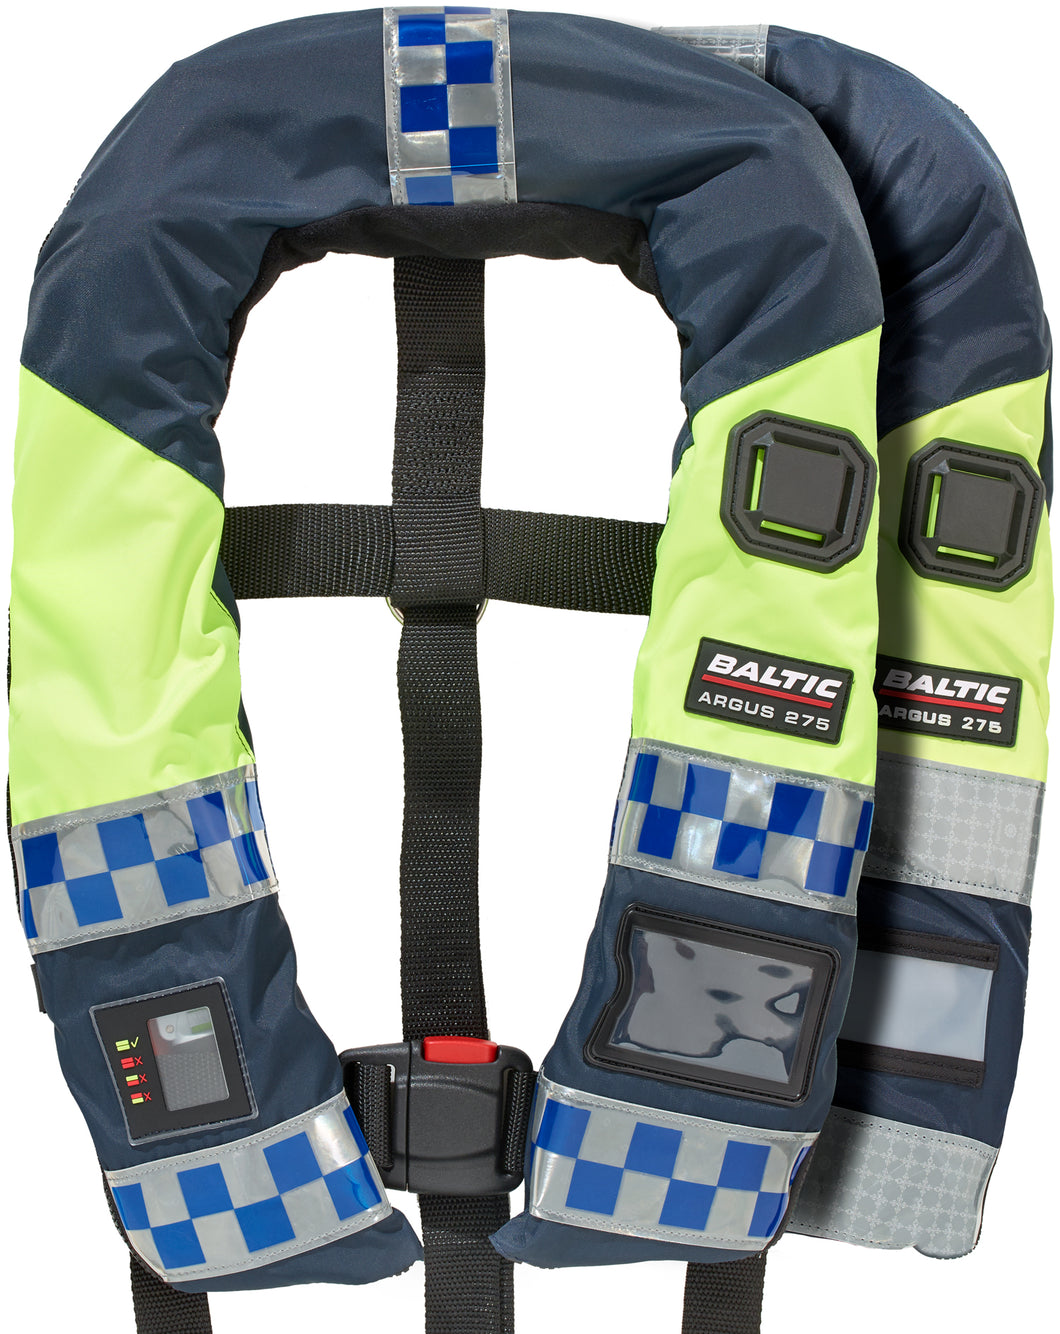 BALTIC EMERGENCY SERVICES POLICE BLUE